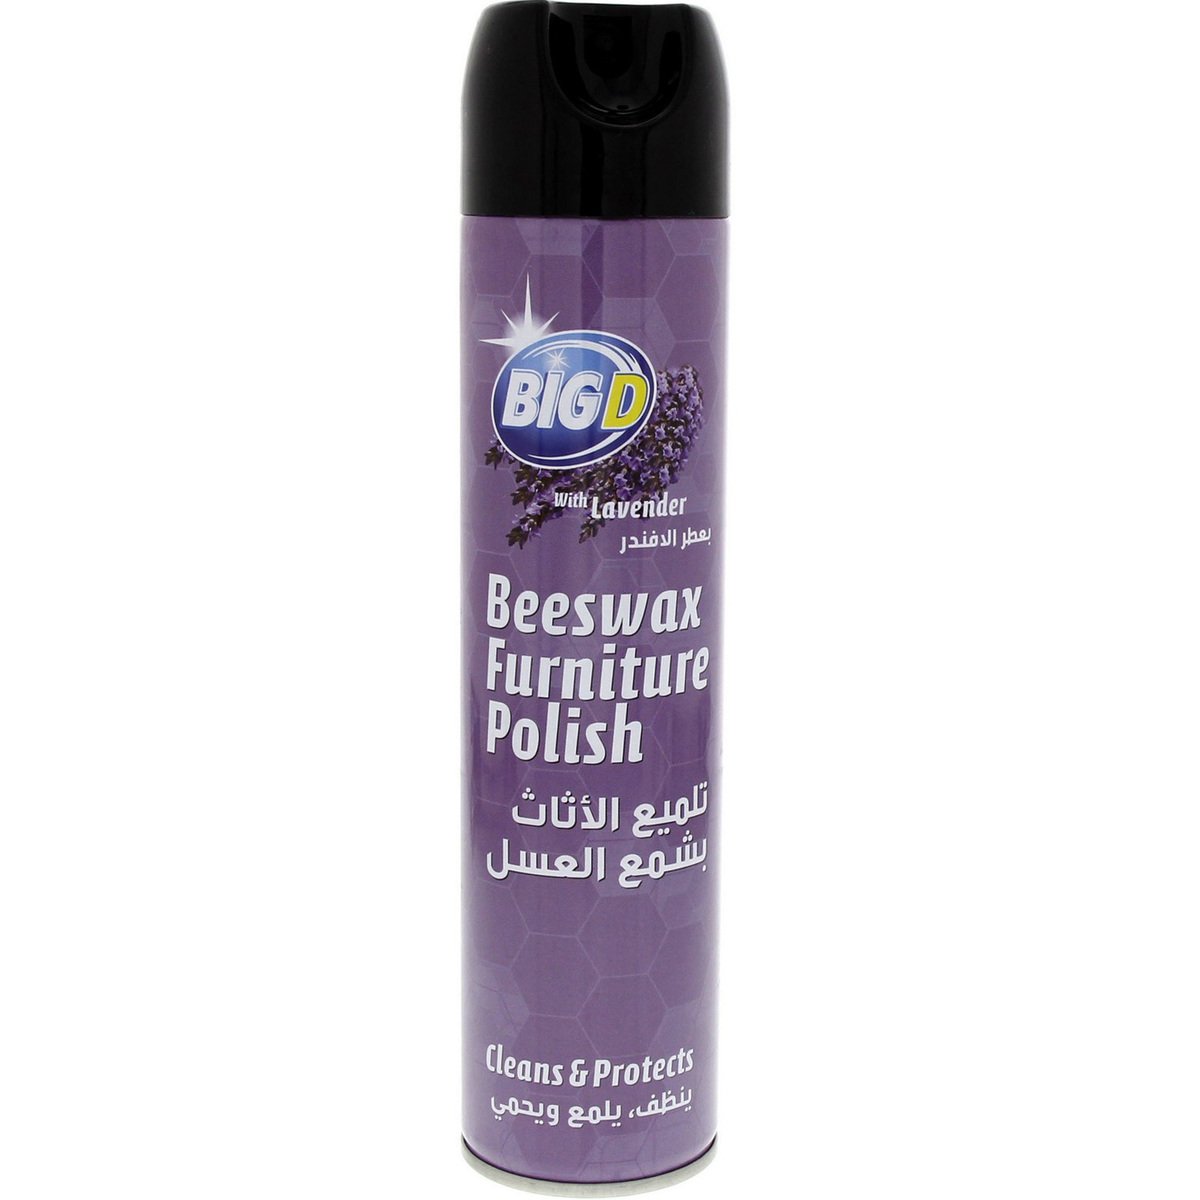 Big D Beeswax Furniture Polish Clean & Protect With Lavender 300ml